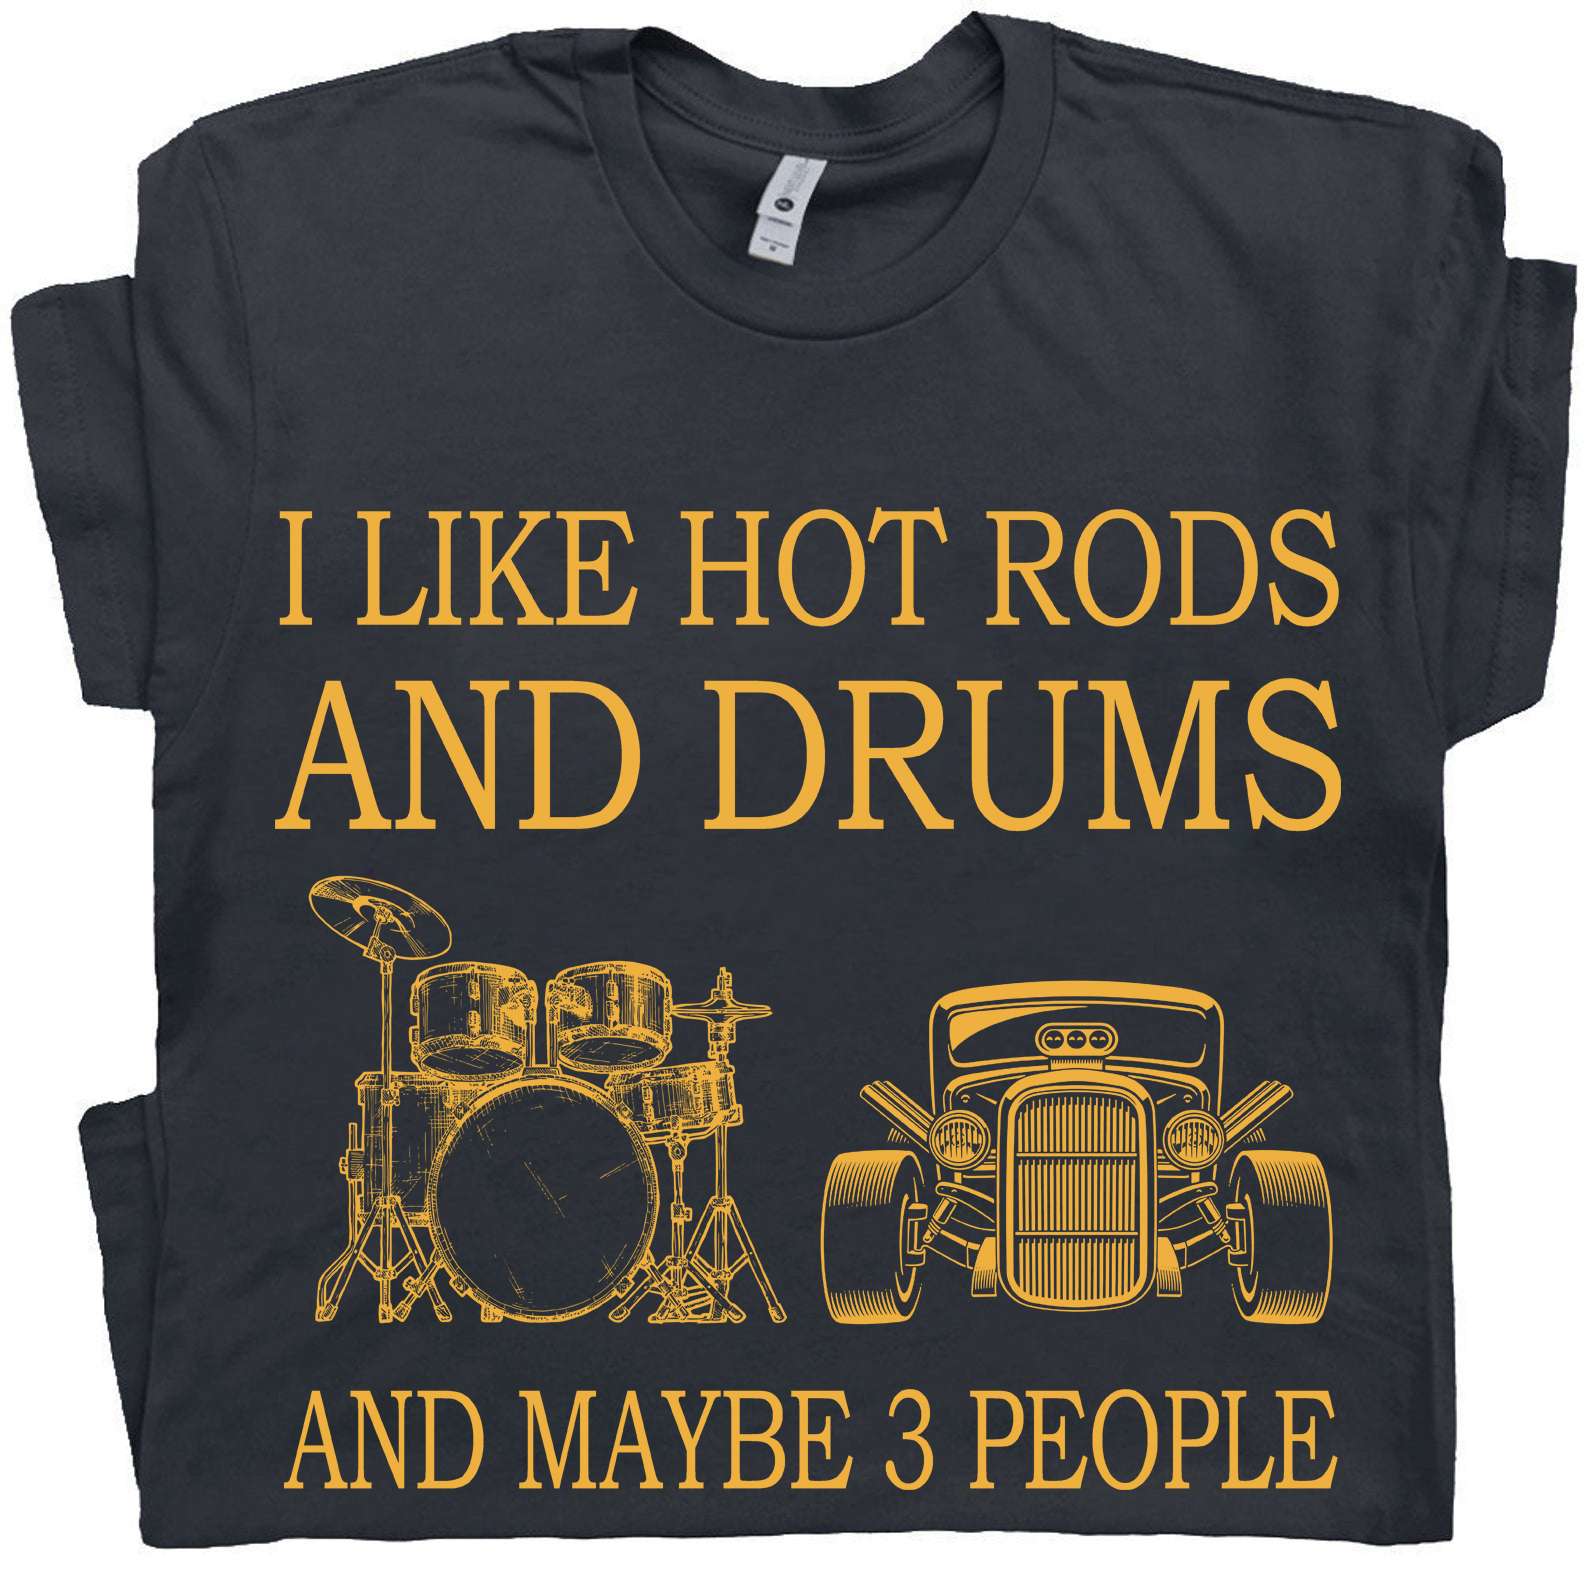 Hot Rods Drums - I like hot rods and drums and maybe 3 people